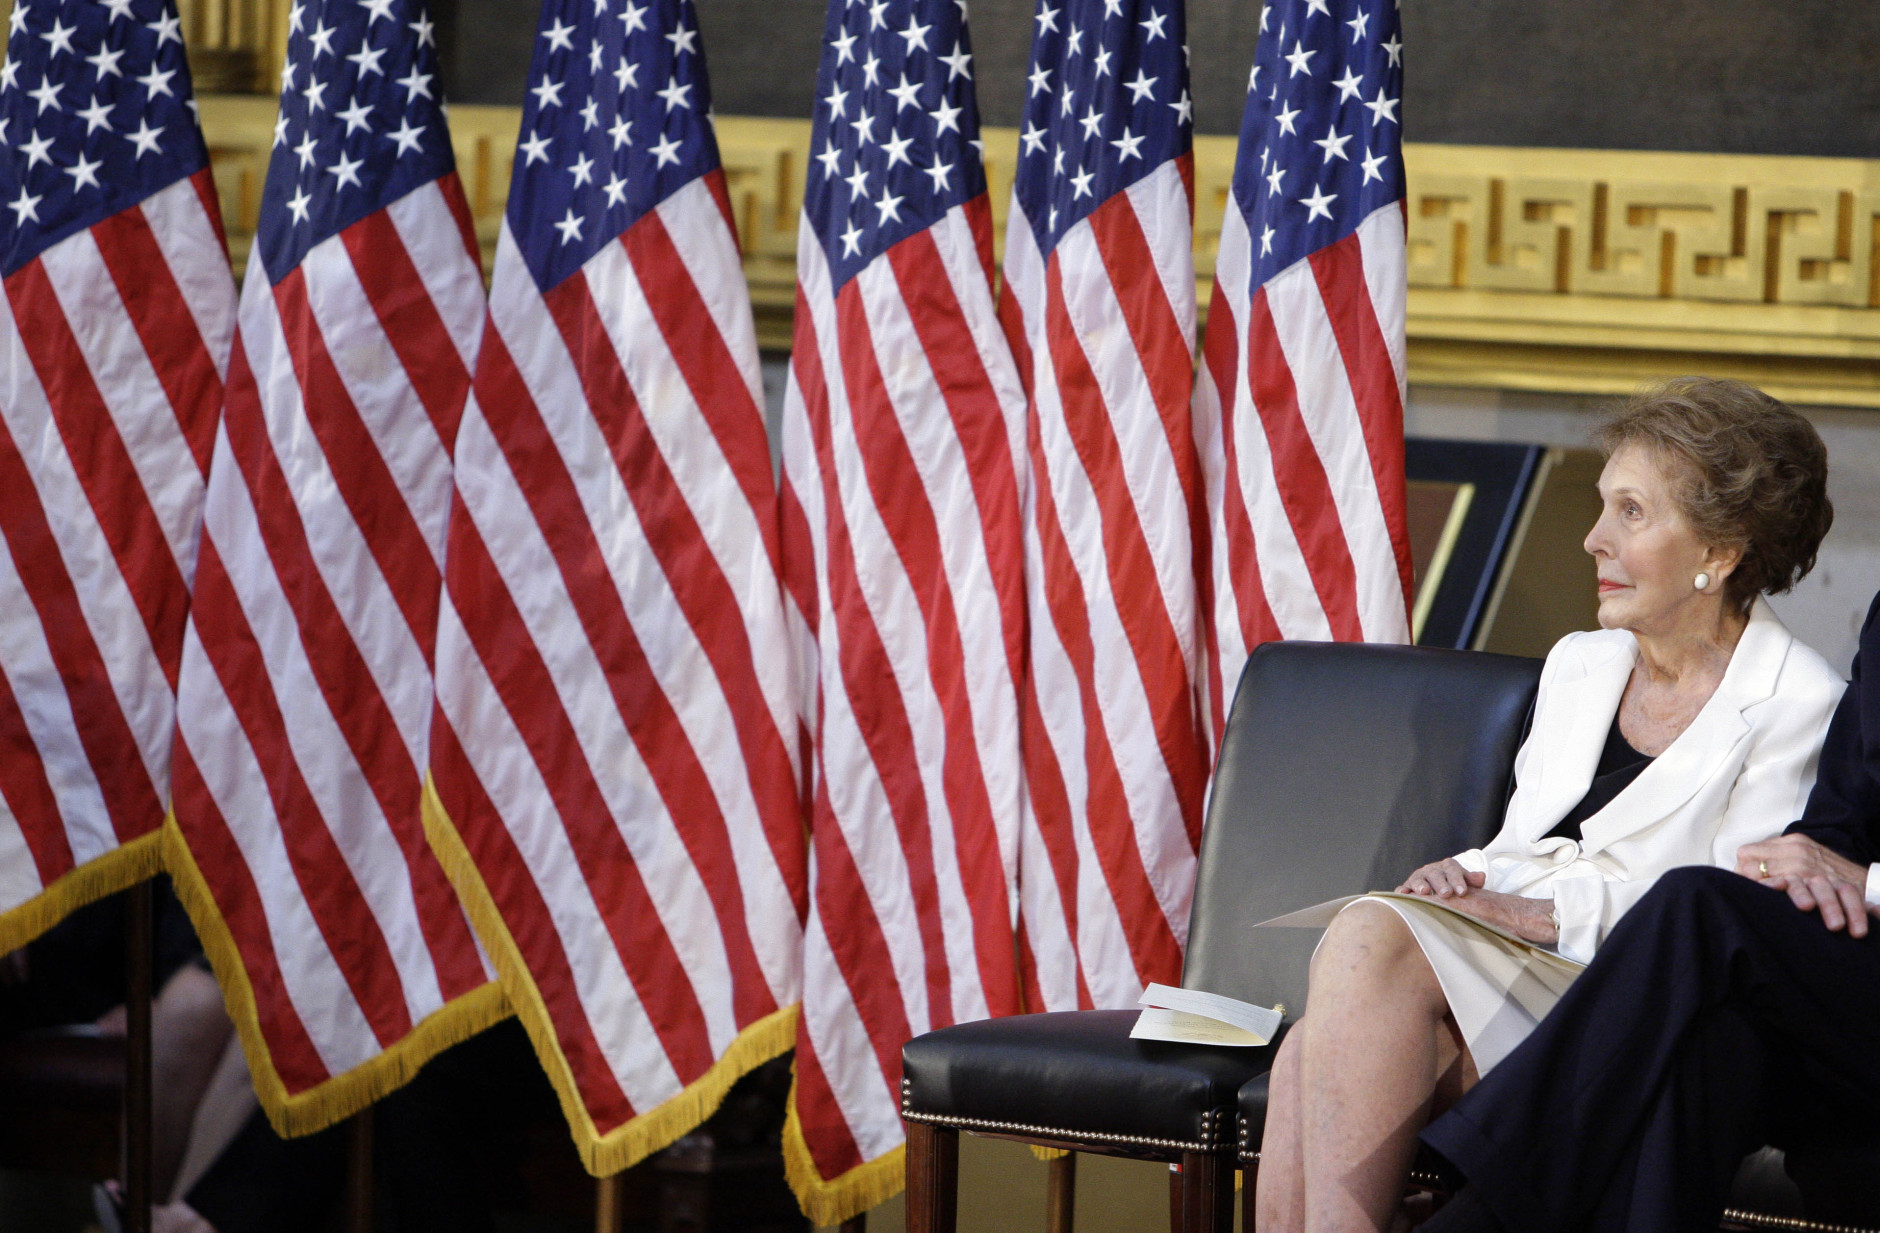 Former first lady Nancy Reagan sits in the Capitol Rotunda in Washington, Wednesday, June 3, 2009, during a ceremony to unveil a bronze statue of President Ronald Reagan. (AP Photo/Alex Brandon)